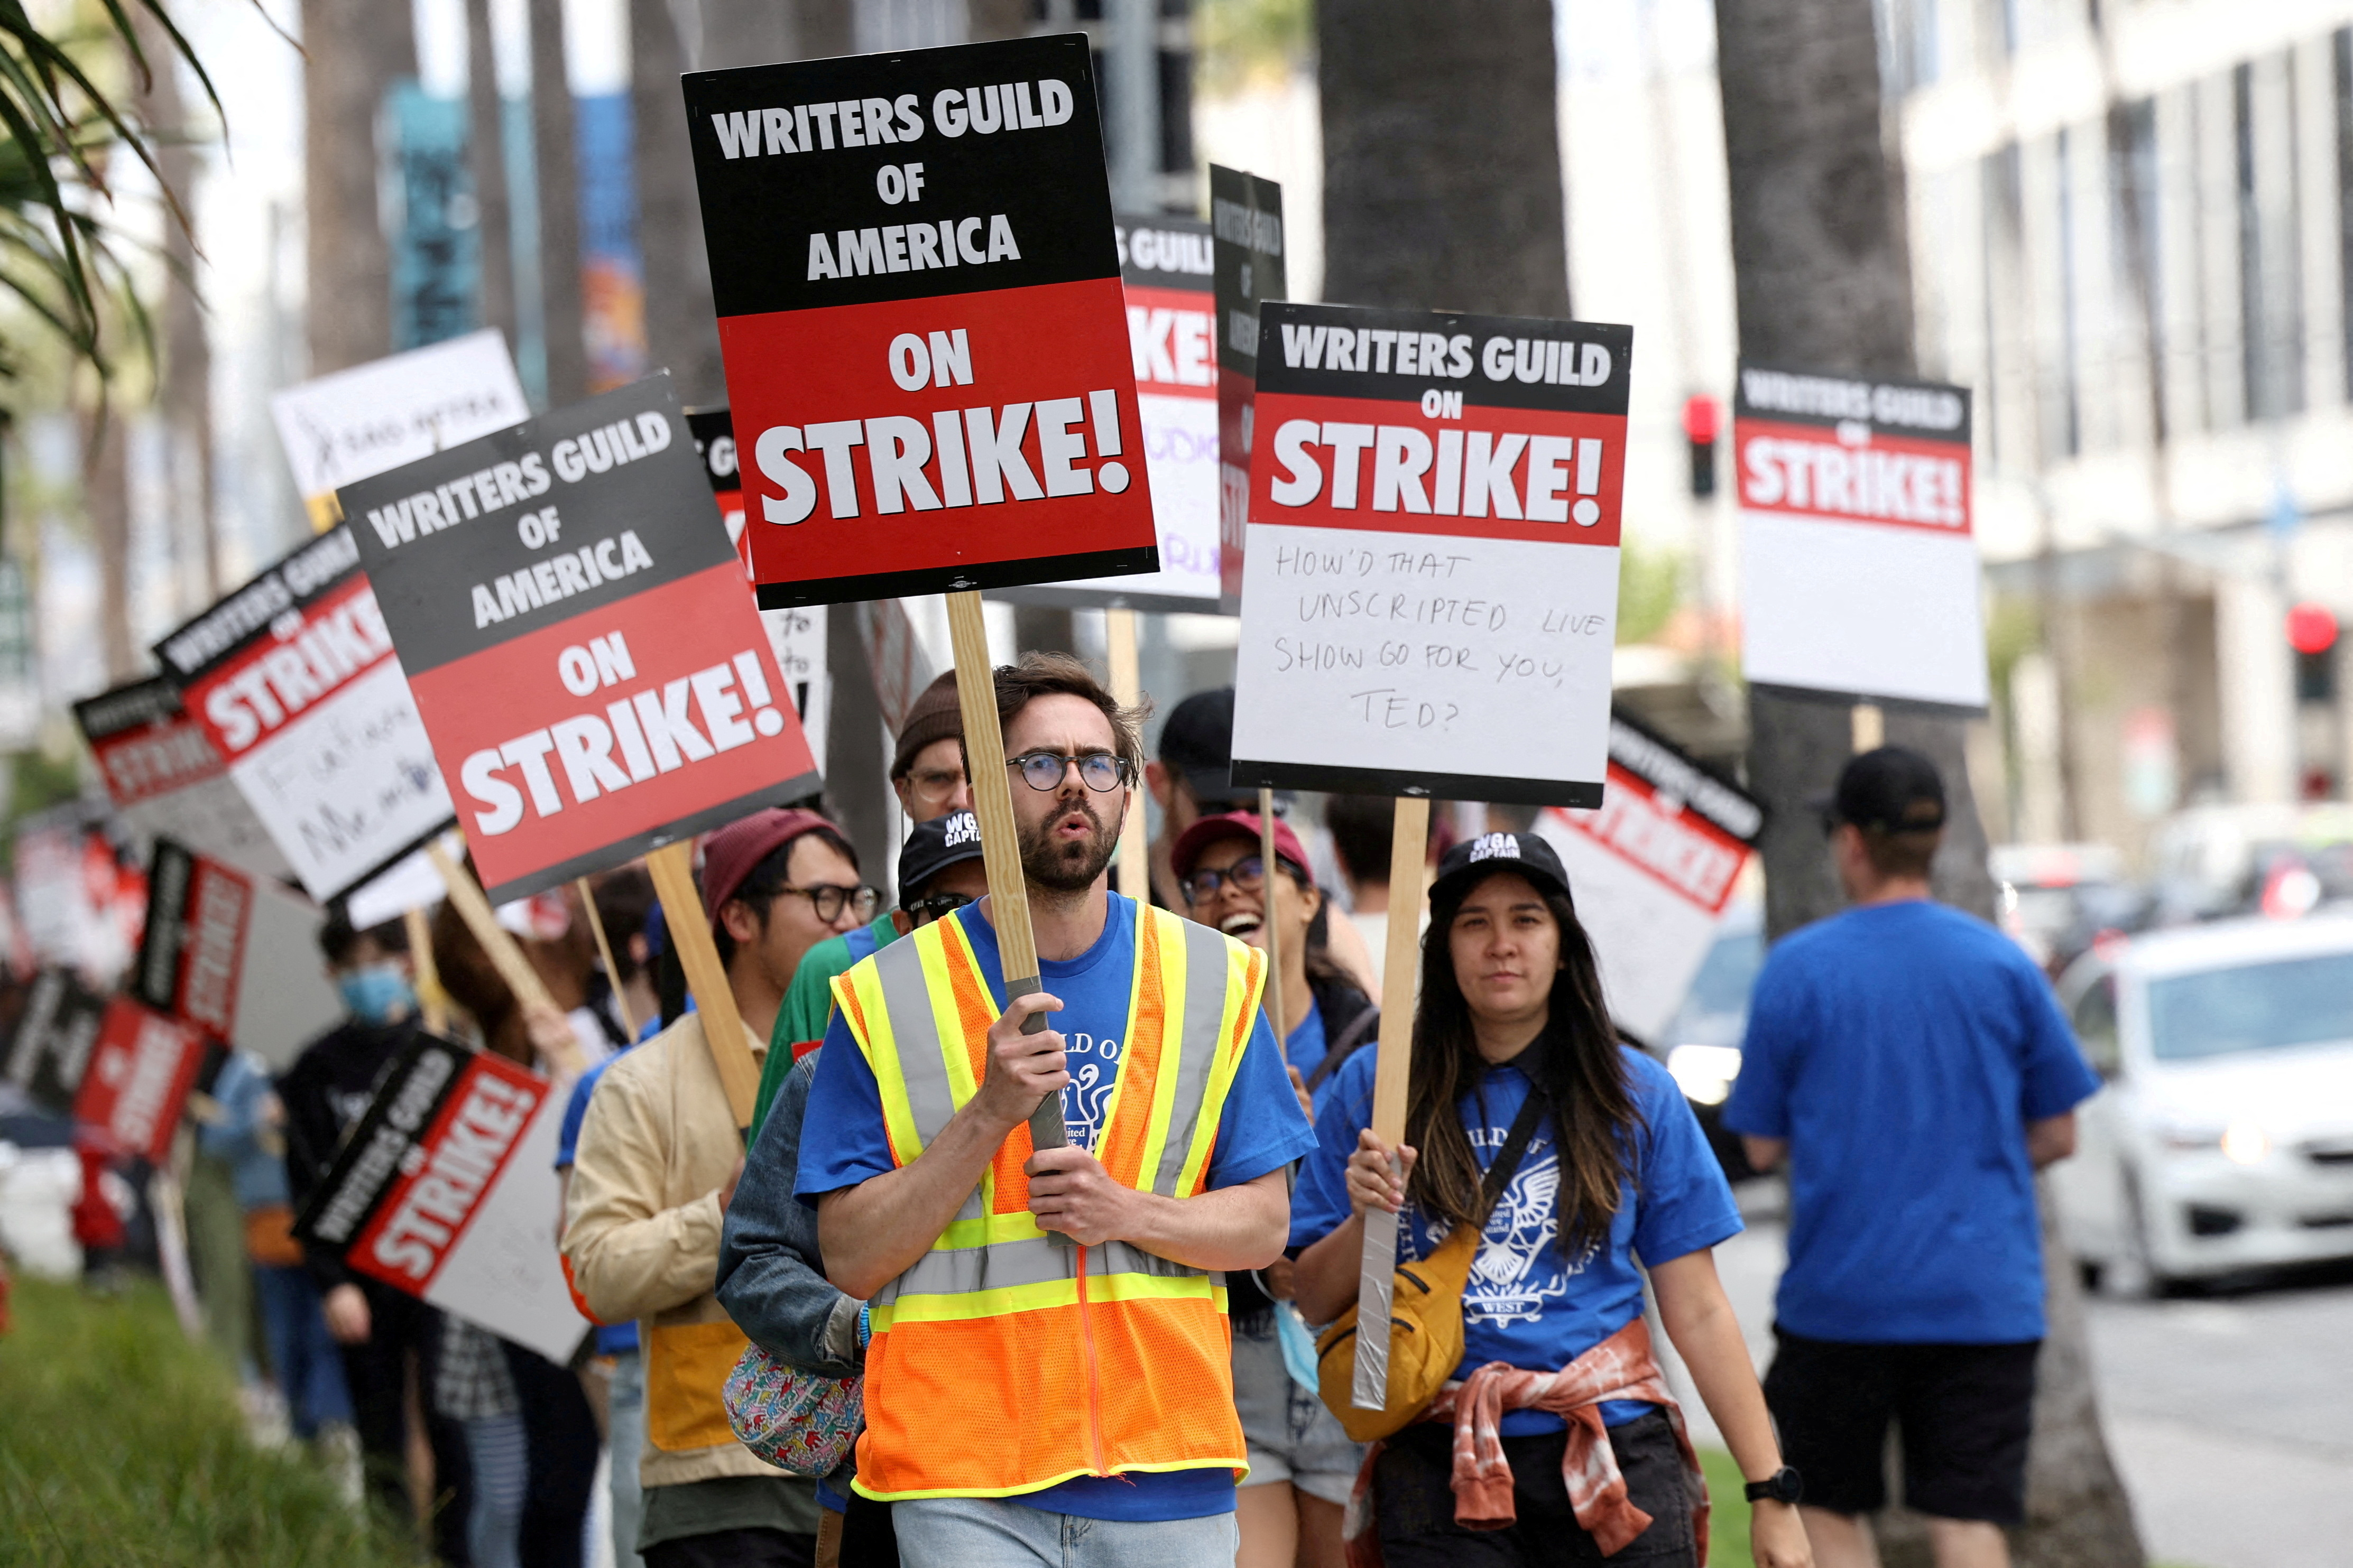 Members of the Writers Guild of America protest in California